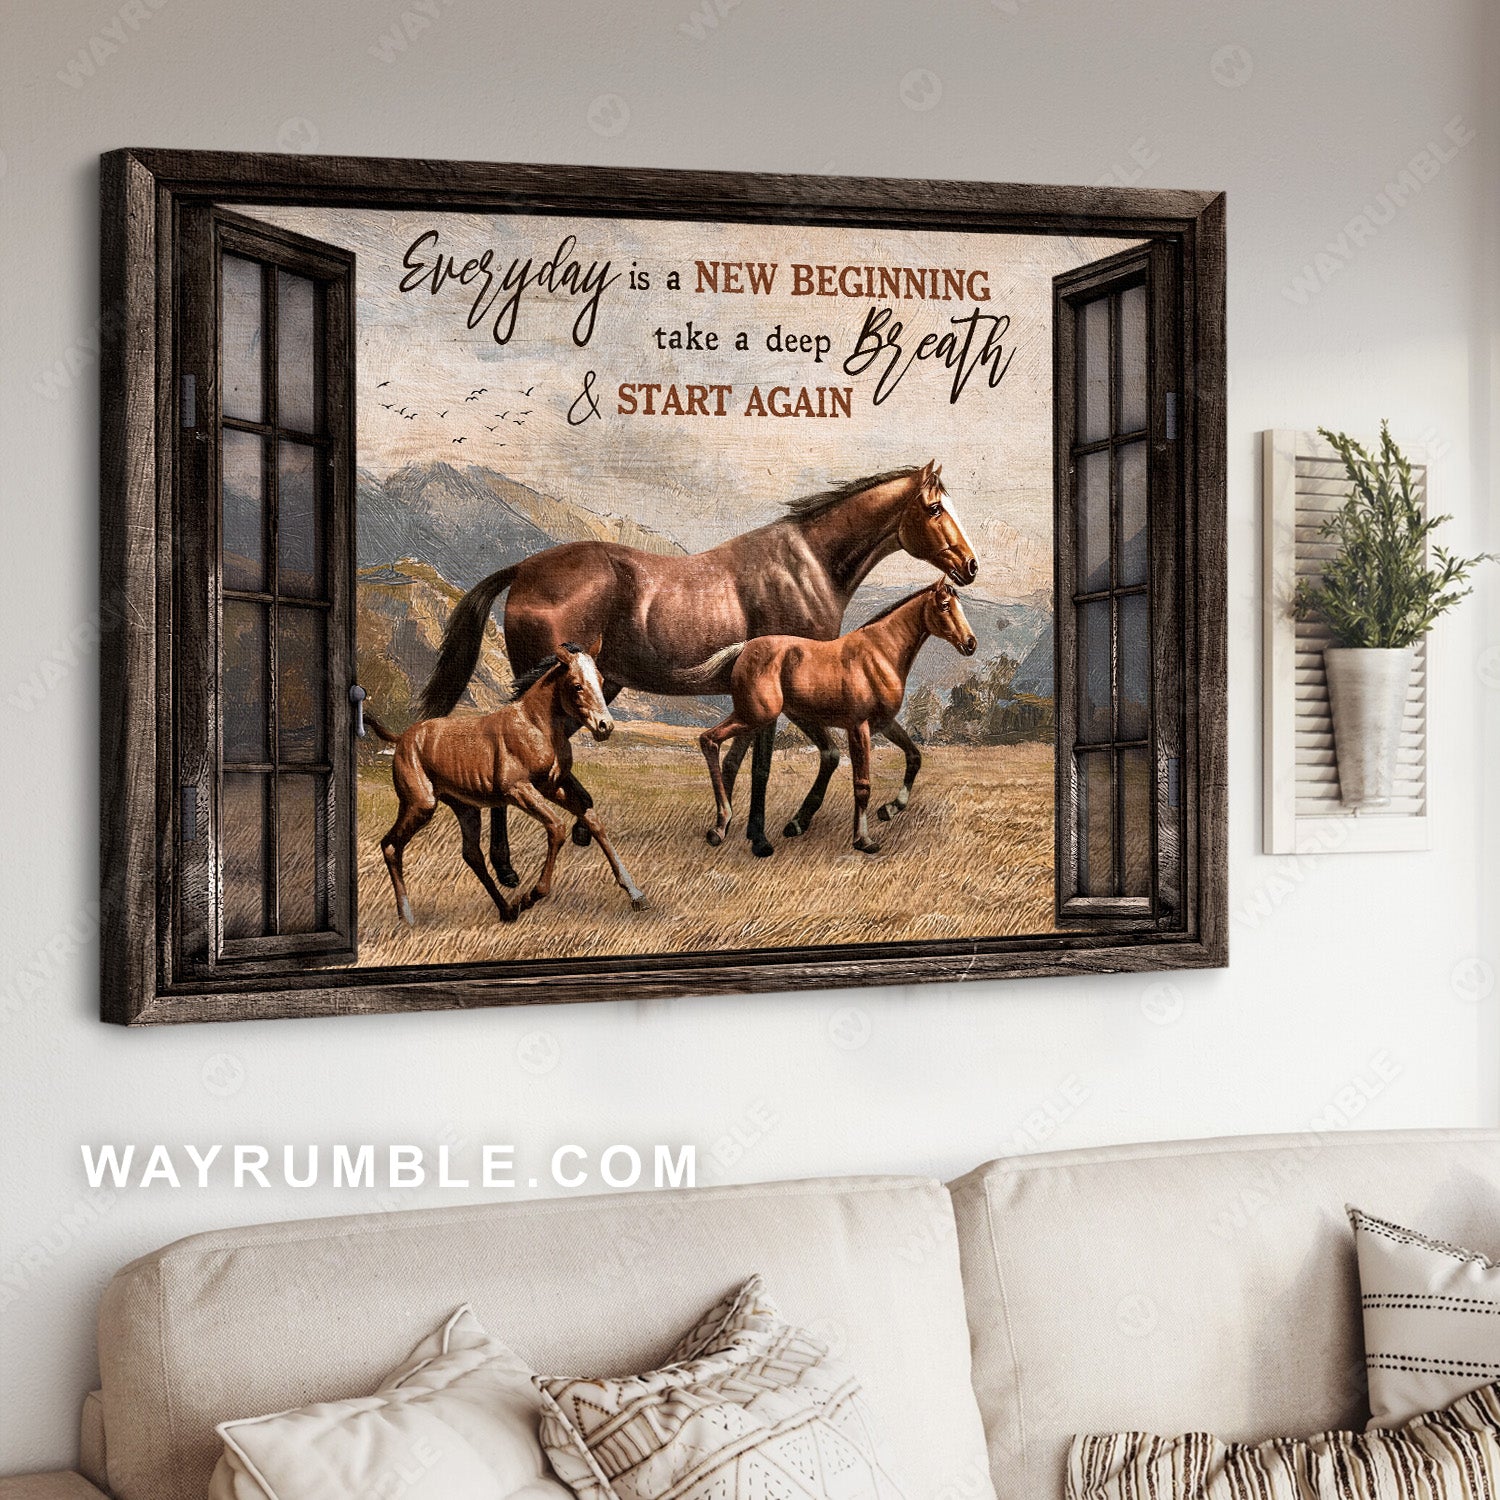 Window frame, Horse painting, Running in grassland, Every is a new beginning- Jesus Landscape Canvas Prints, Christian Wall Art